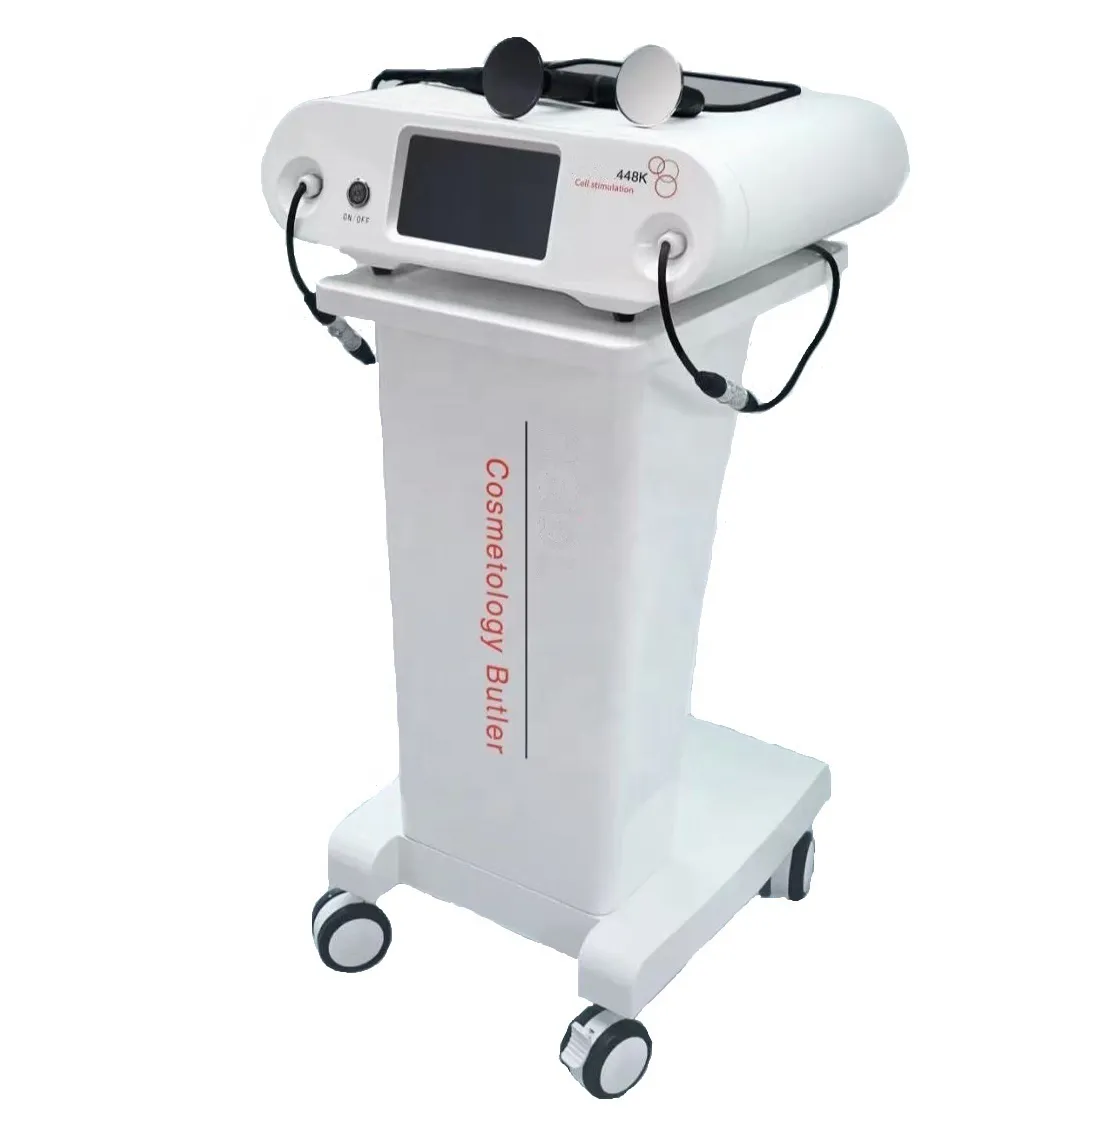 2022 Slimming Machine Obvious Effect Mono Radiofrequency 448khz CET RET Radio Frequency Radiofrecuencia RF Deep Beauty Equipment